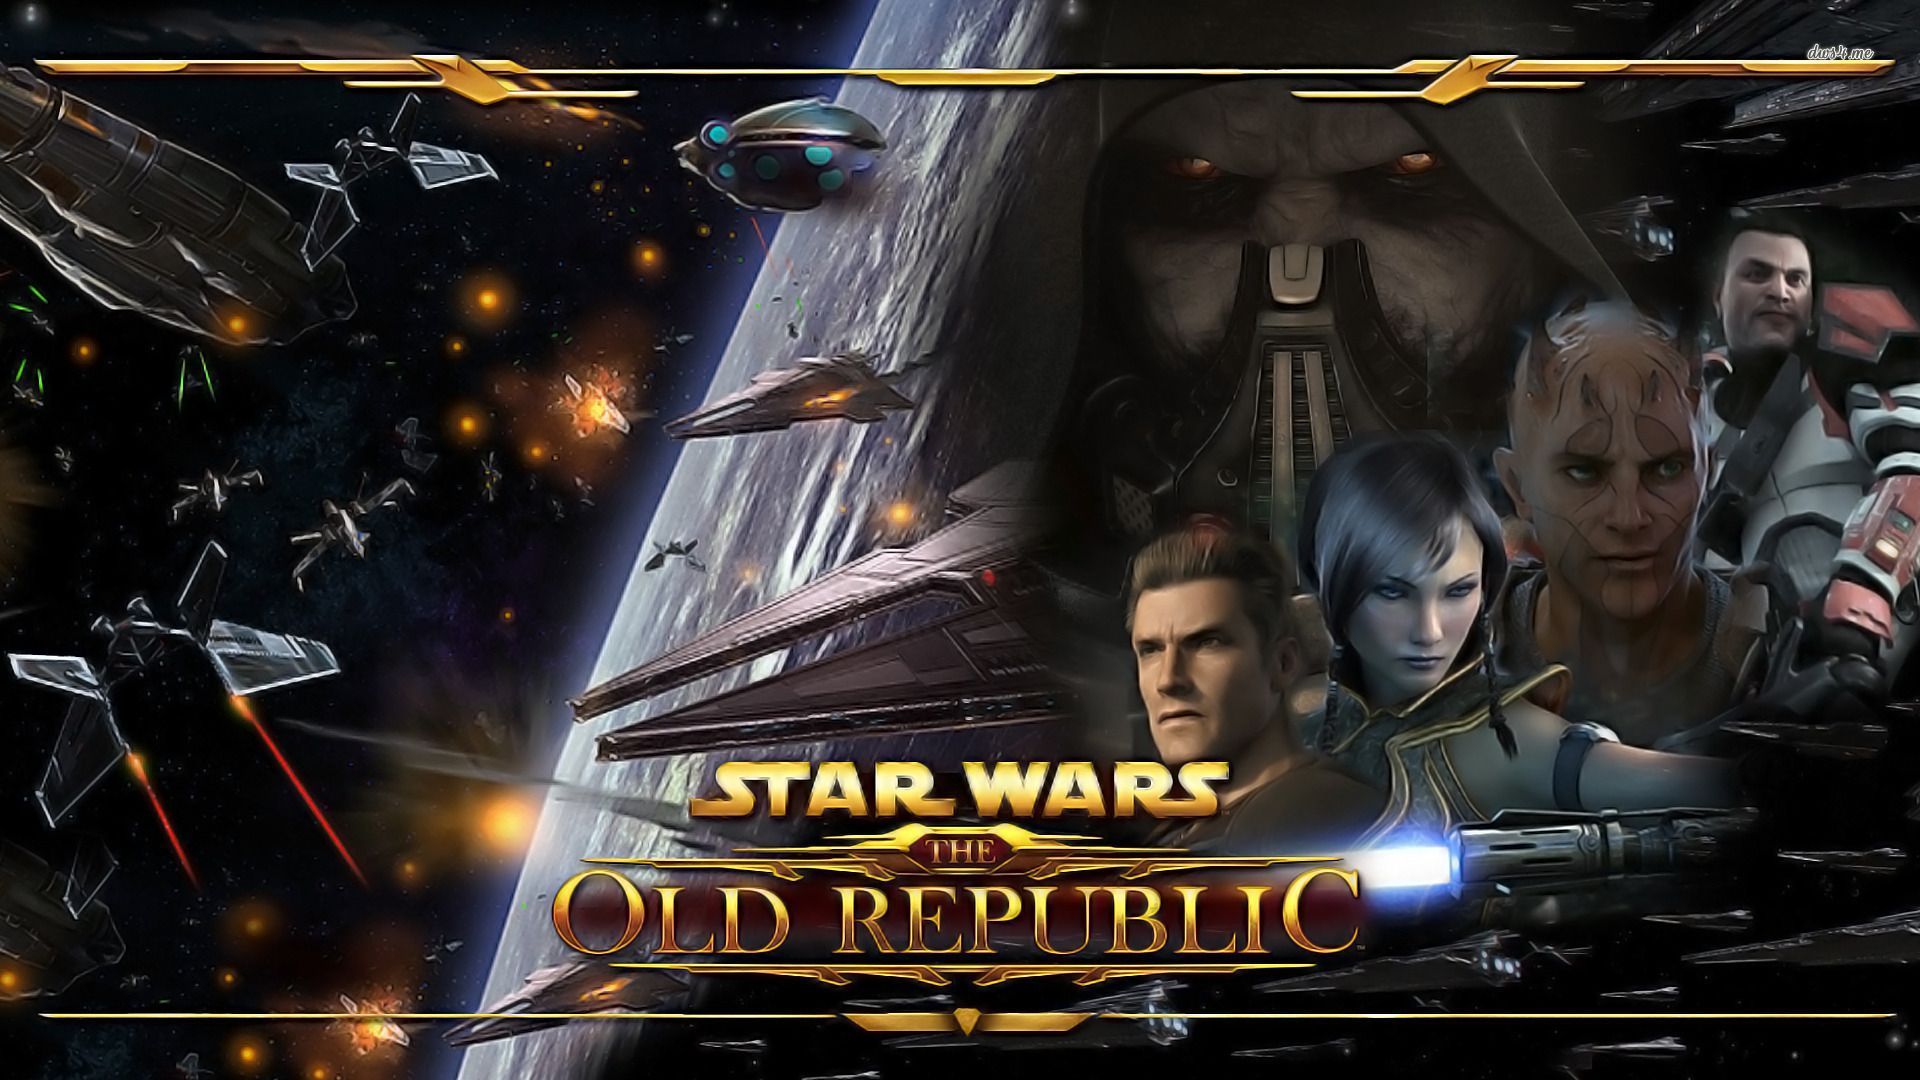 Star Wars - The Old Republic wallpaper - Game wallpapers - #10041